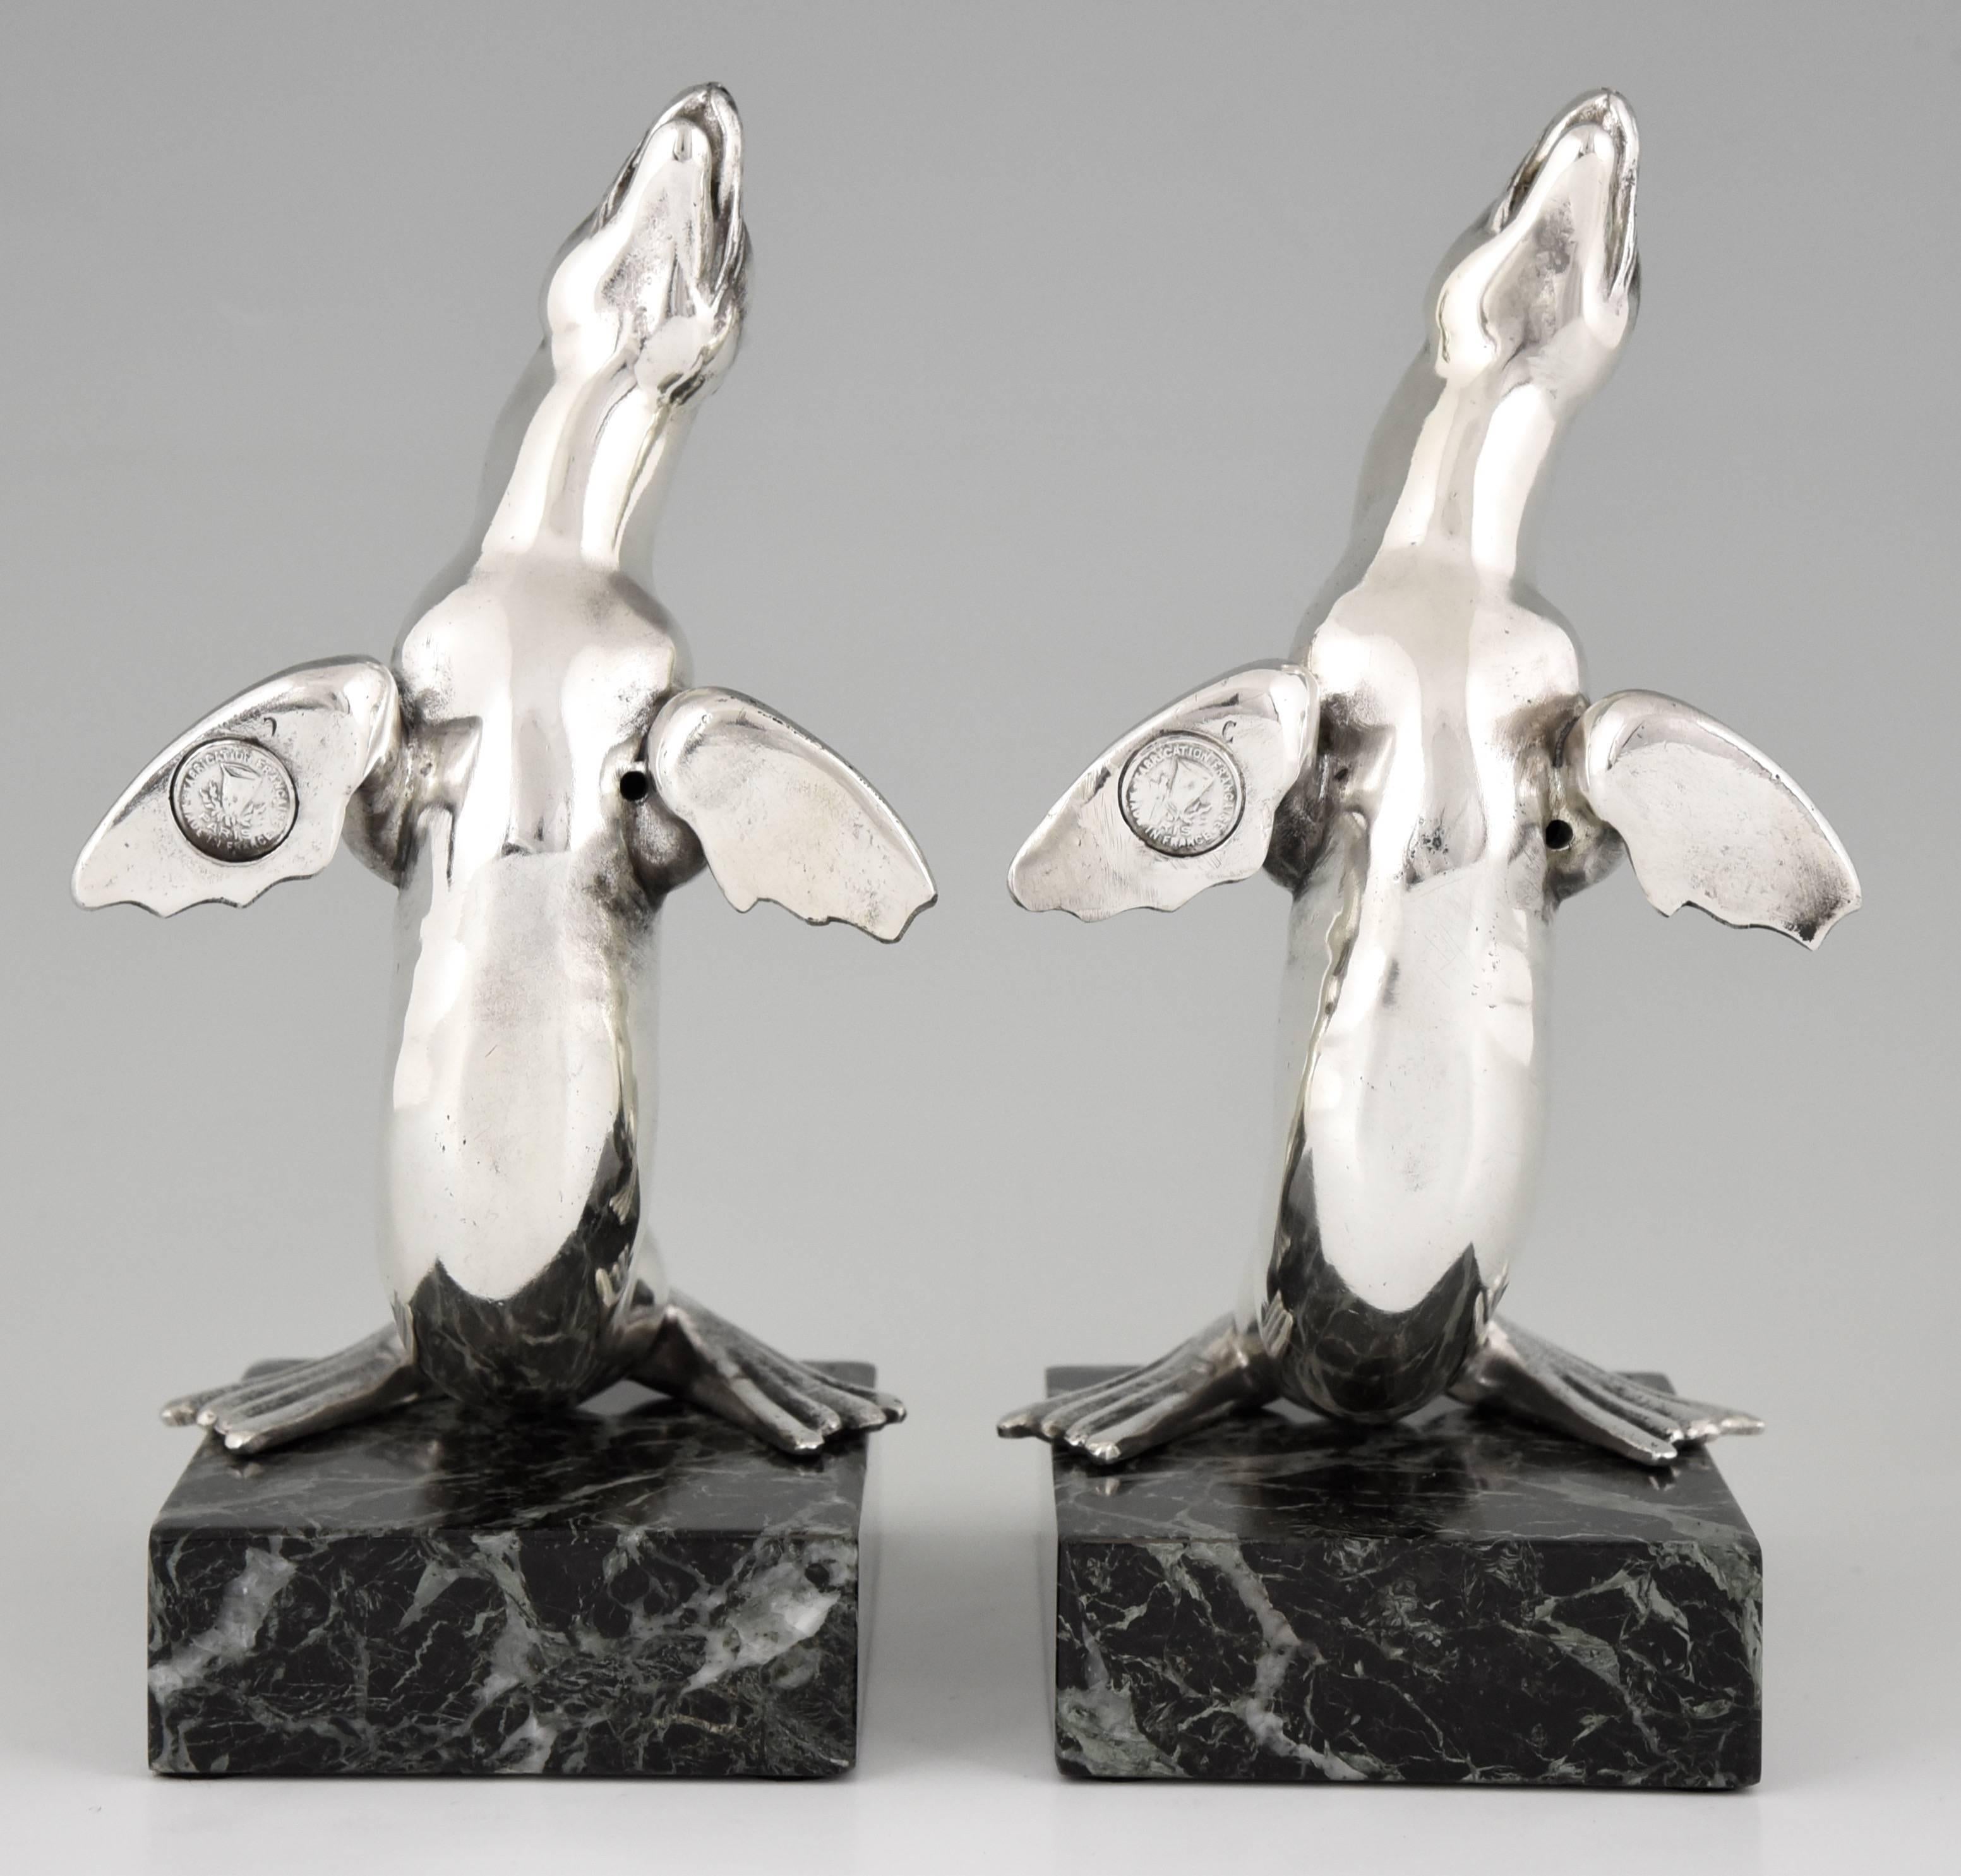 20th Century Art Deco Silvered Seal Bookends by Carvin, 1930 france